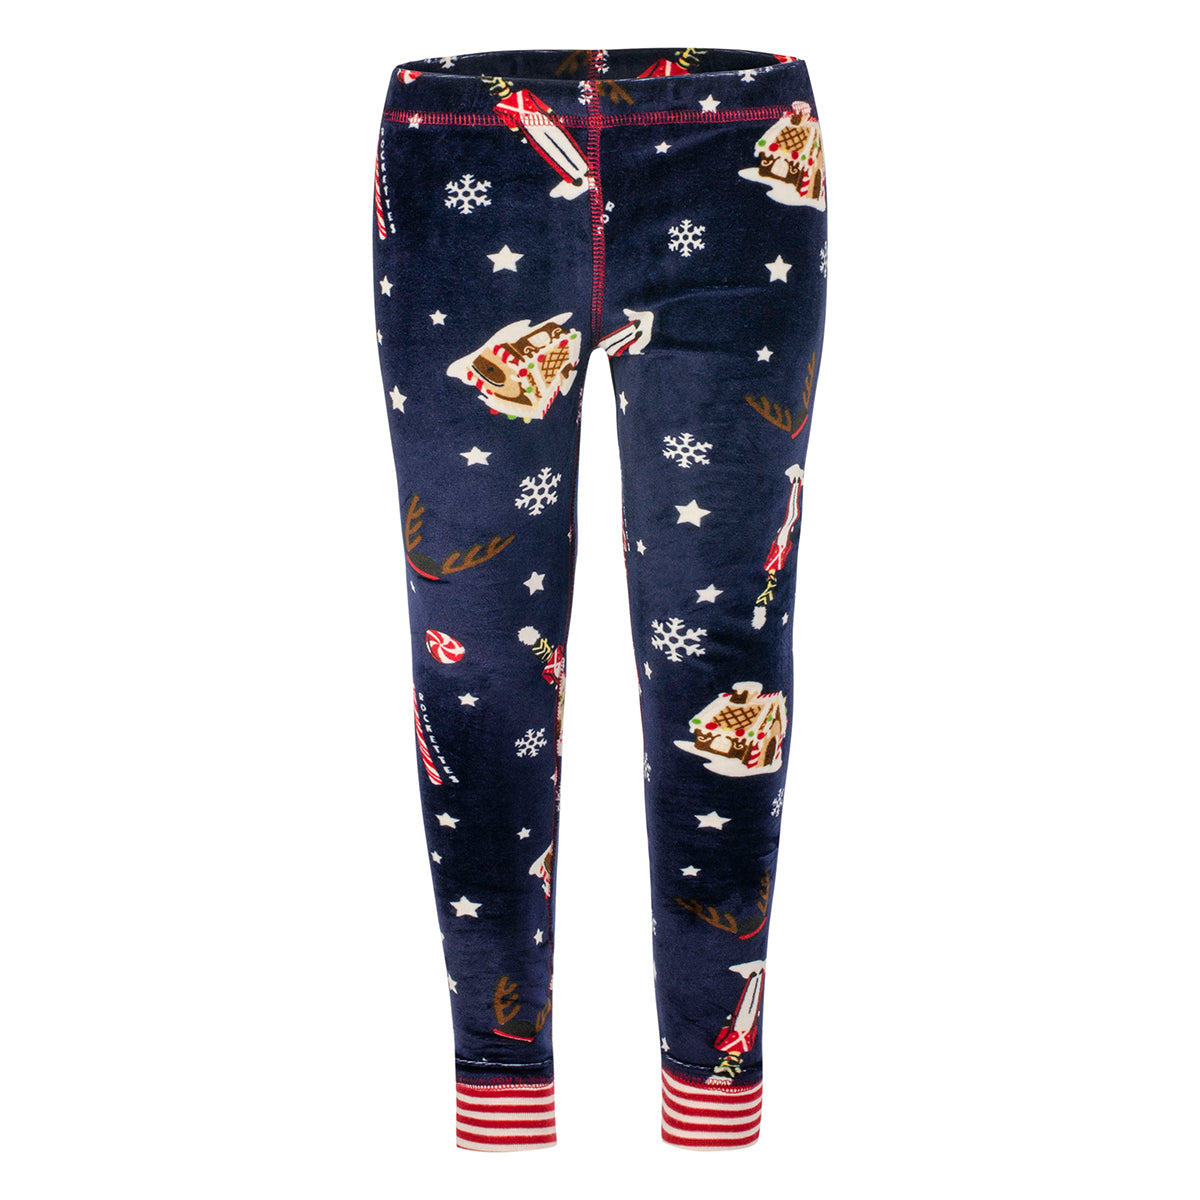 Blue Christmas pajamas pants from front view with snowy print, candy-cane patterns and toy soldier design